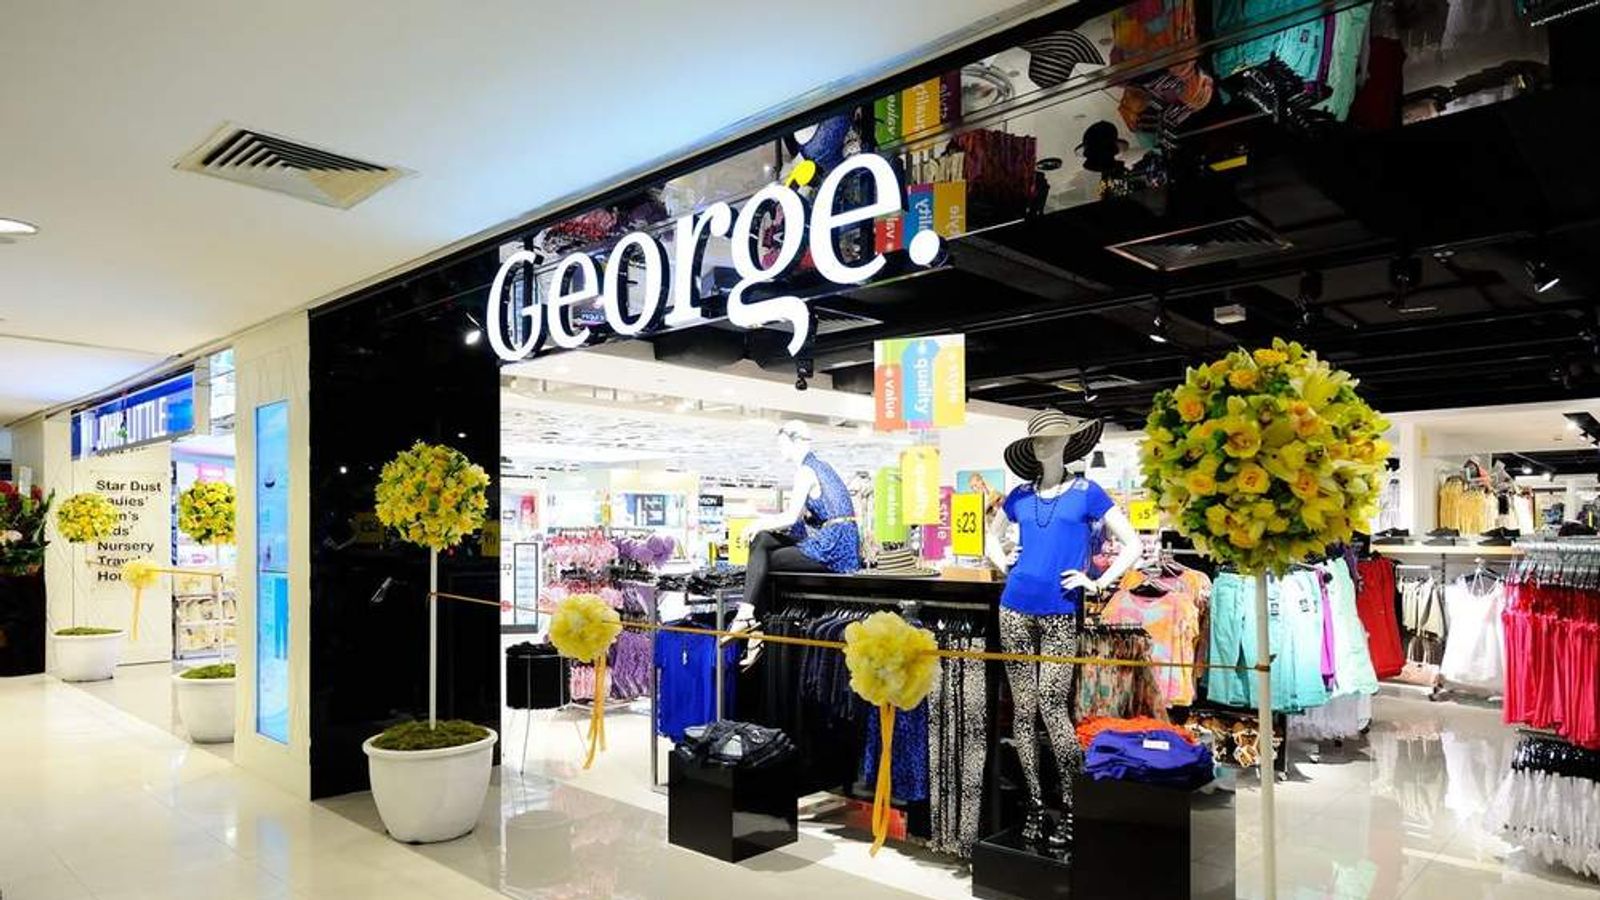 George at Asda's new spring collection looks high end: What to shop